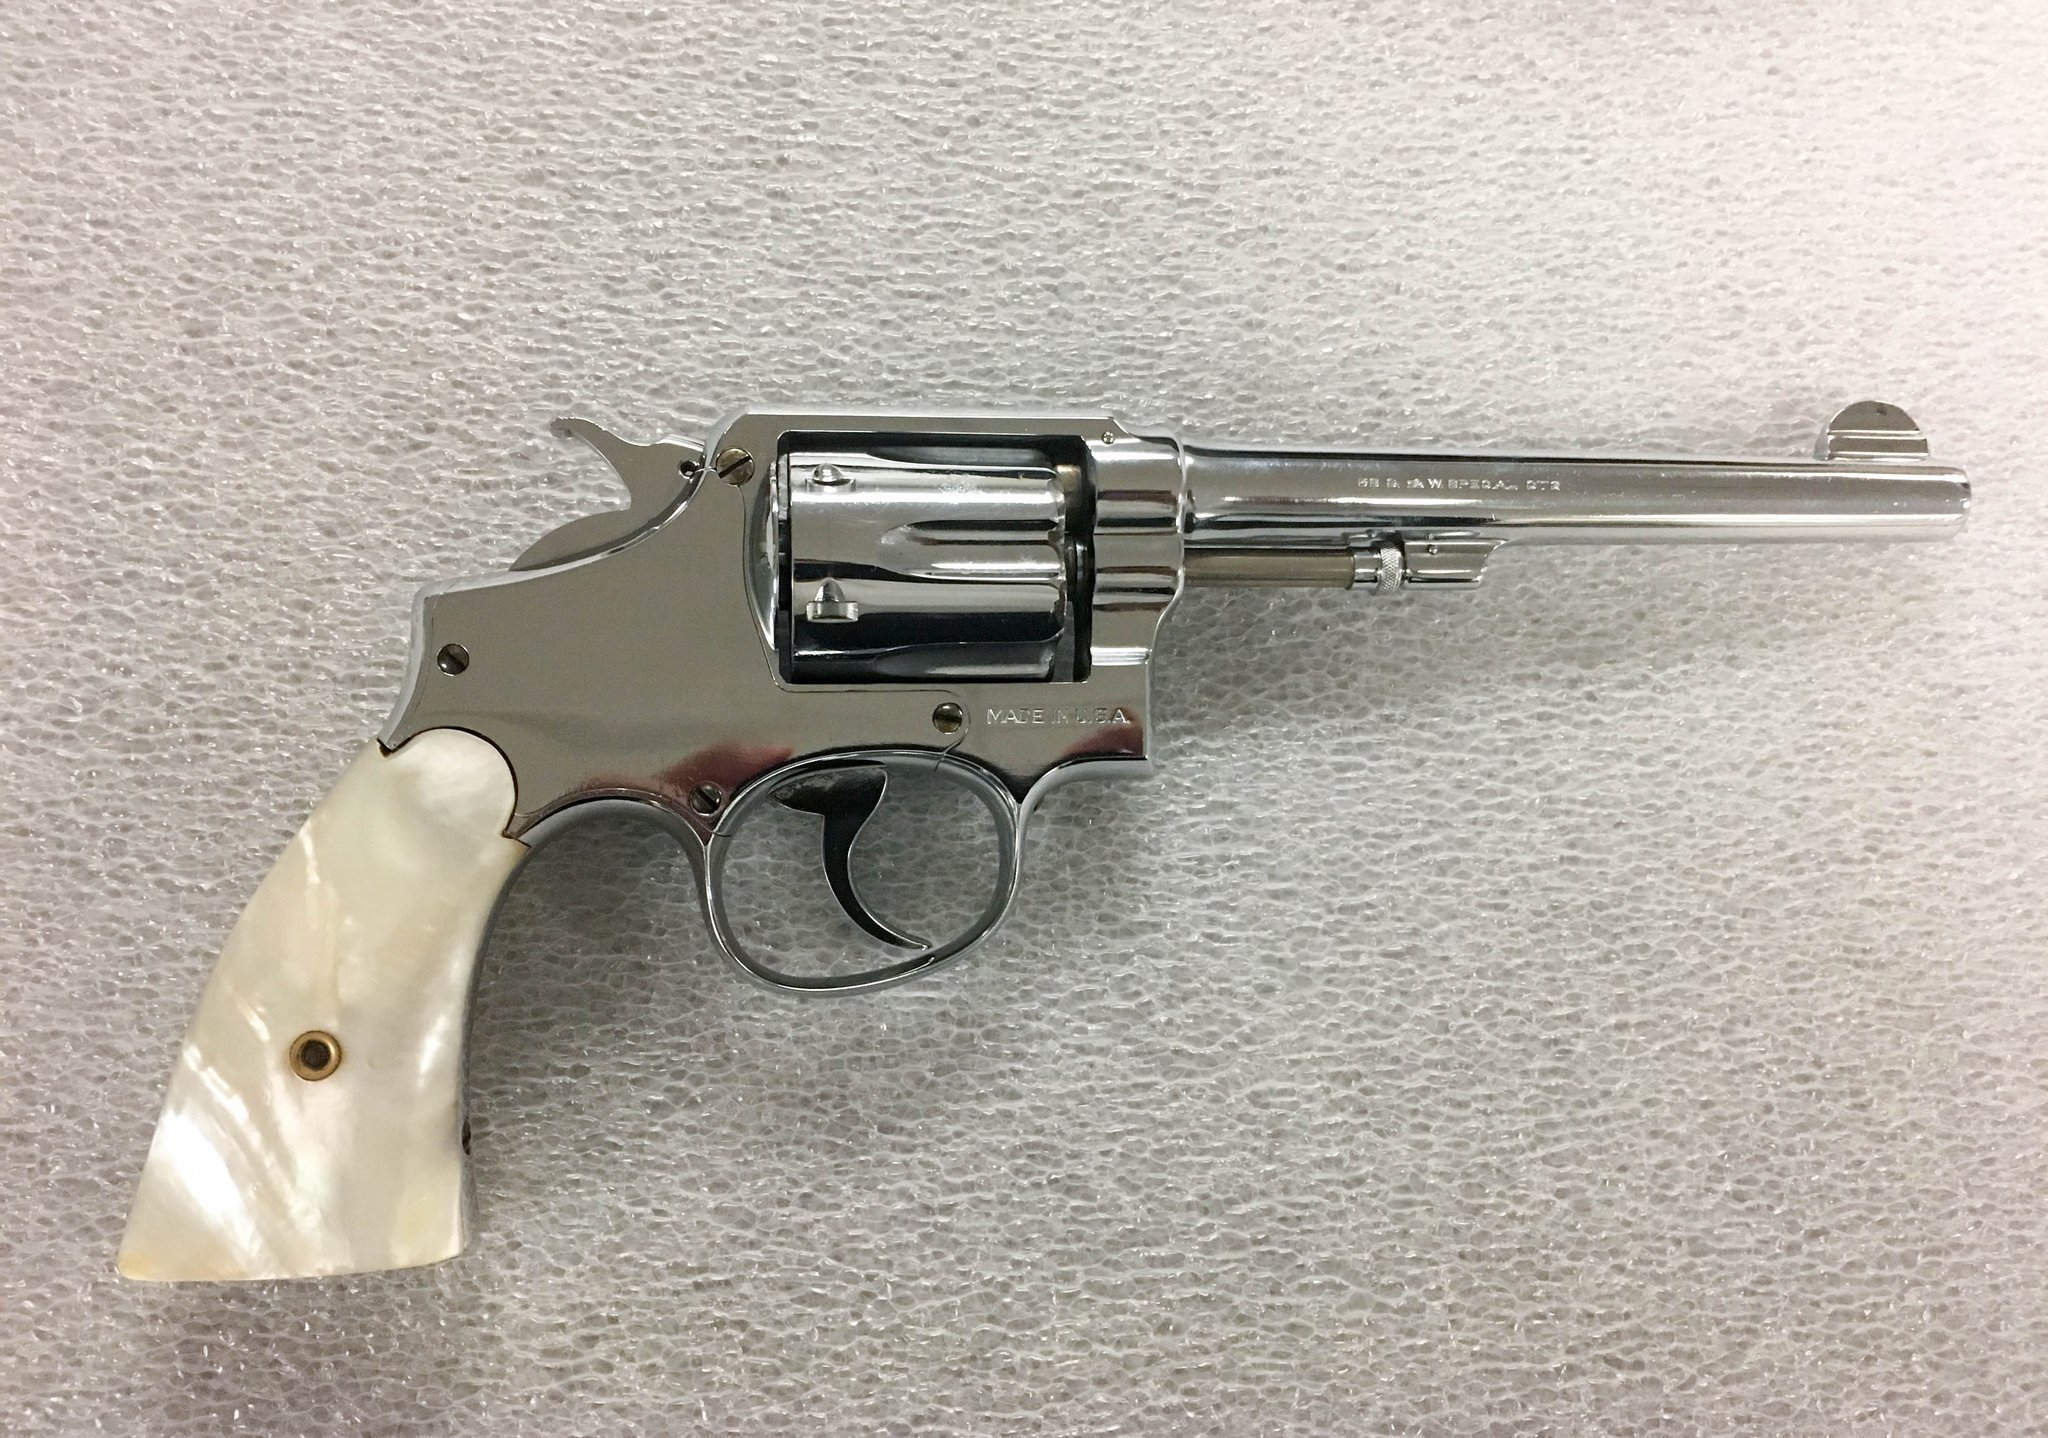 The 1925 Smith & Wesson .38-caliber pearl handed revolver confiscated from Al Capone during an arrest in 1928.